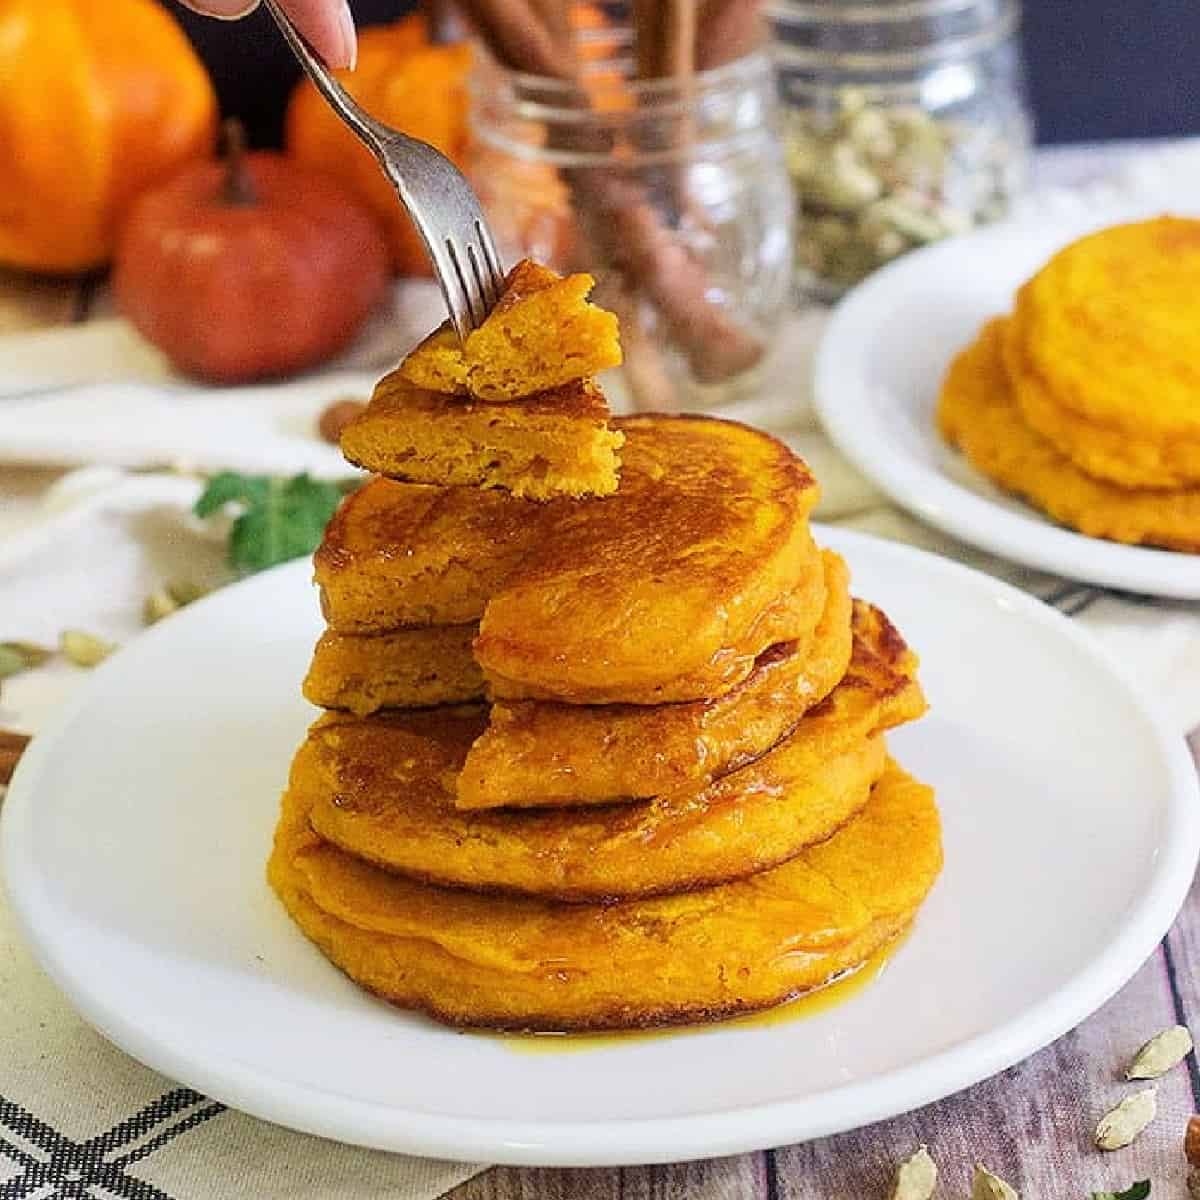 Learn How to Make Pumpkin Pancakes for breakfast and brunch. These pancakes are fluffy and full of delicious flavors, and are ready in no time!
